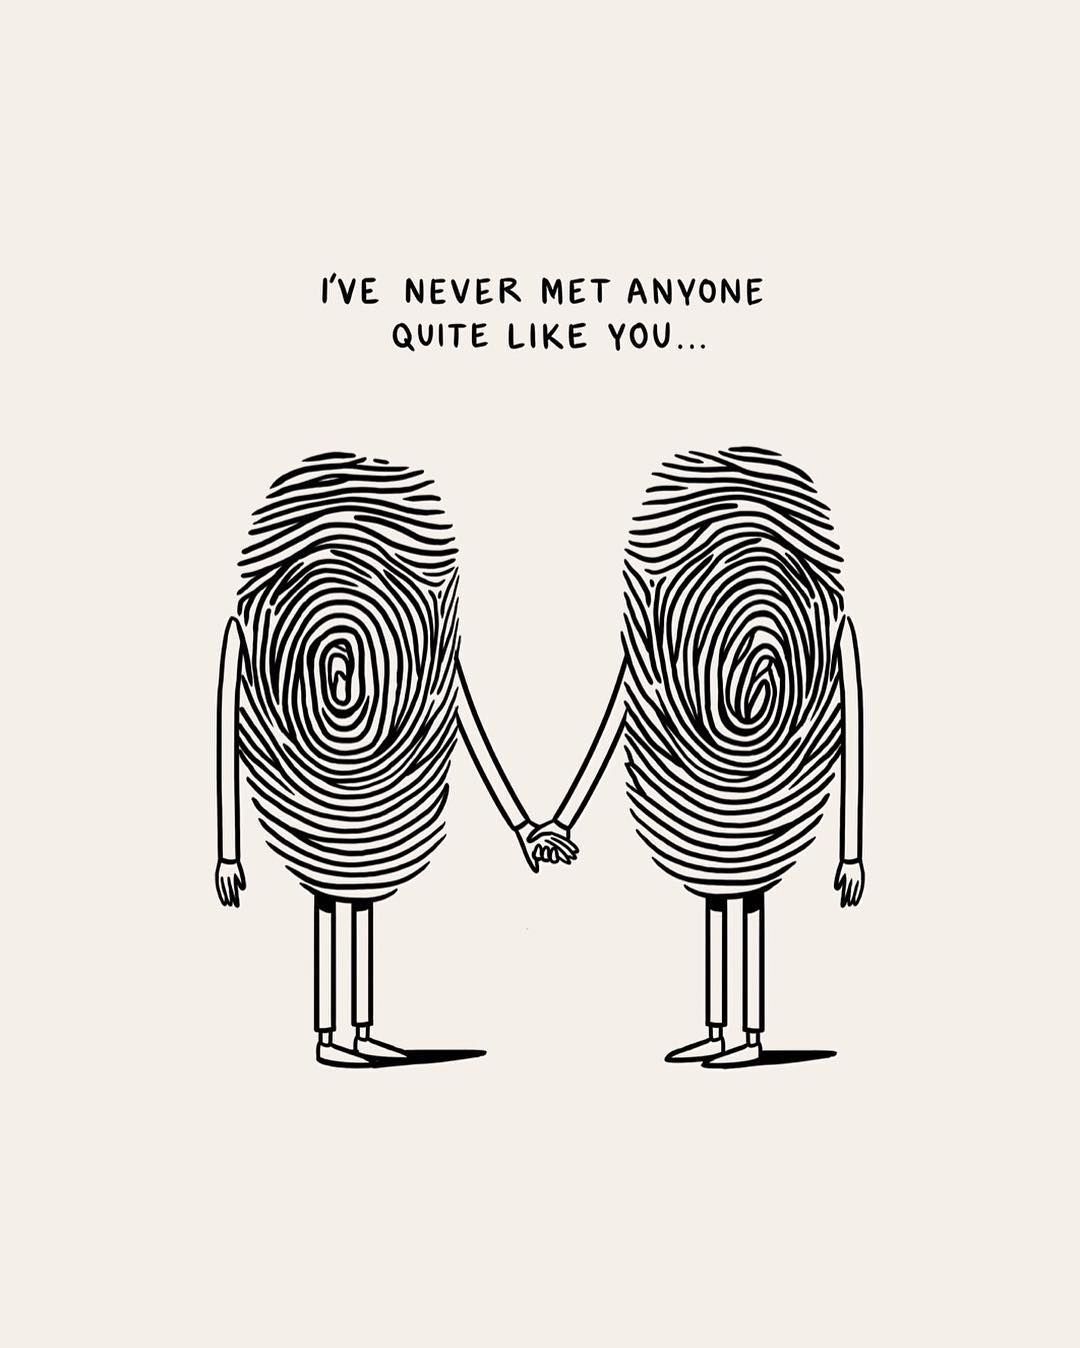 Ive Never Met Anyone Quite Like You…